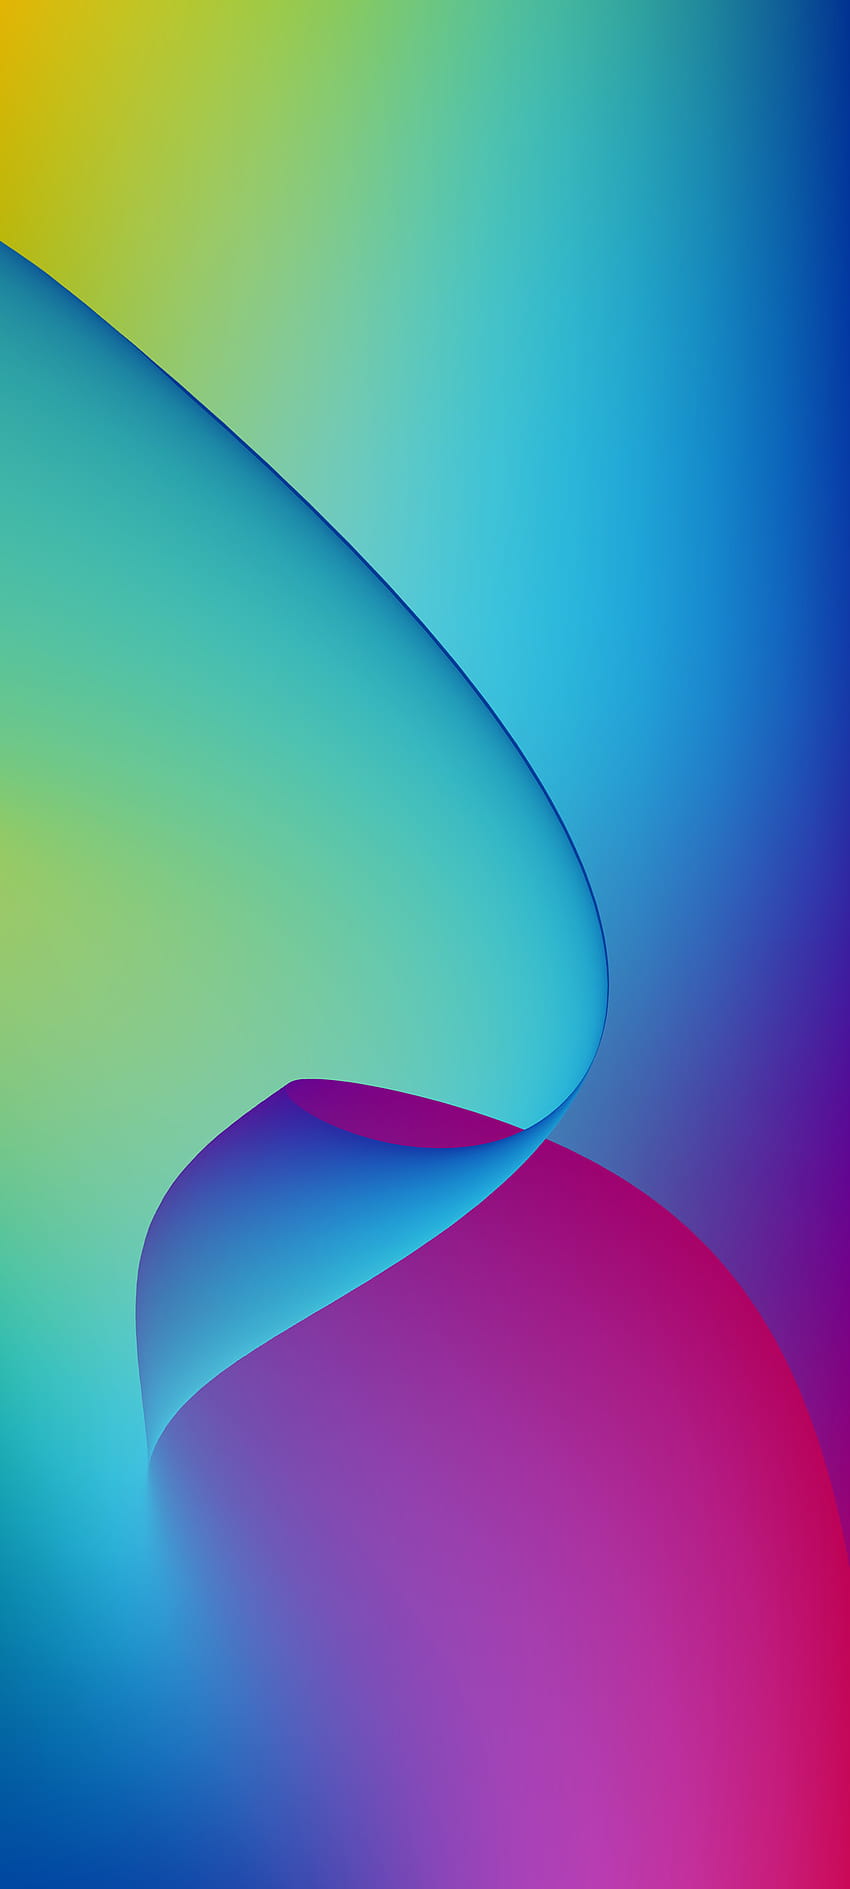 Light, Colorfulness, Slope, Art, Tints and Shades, Backgrounds, vivo y53 HD phone wallpaper